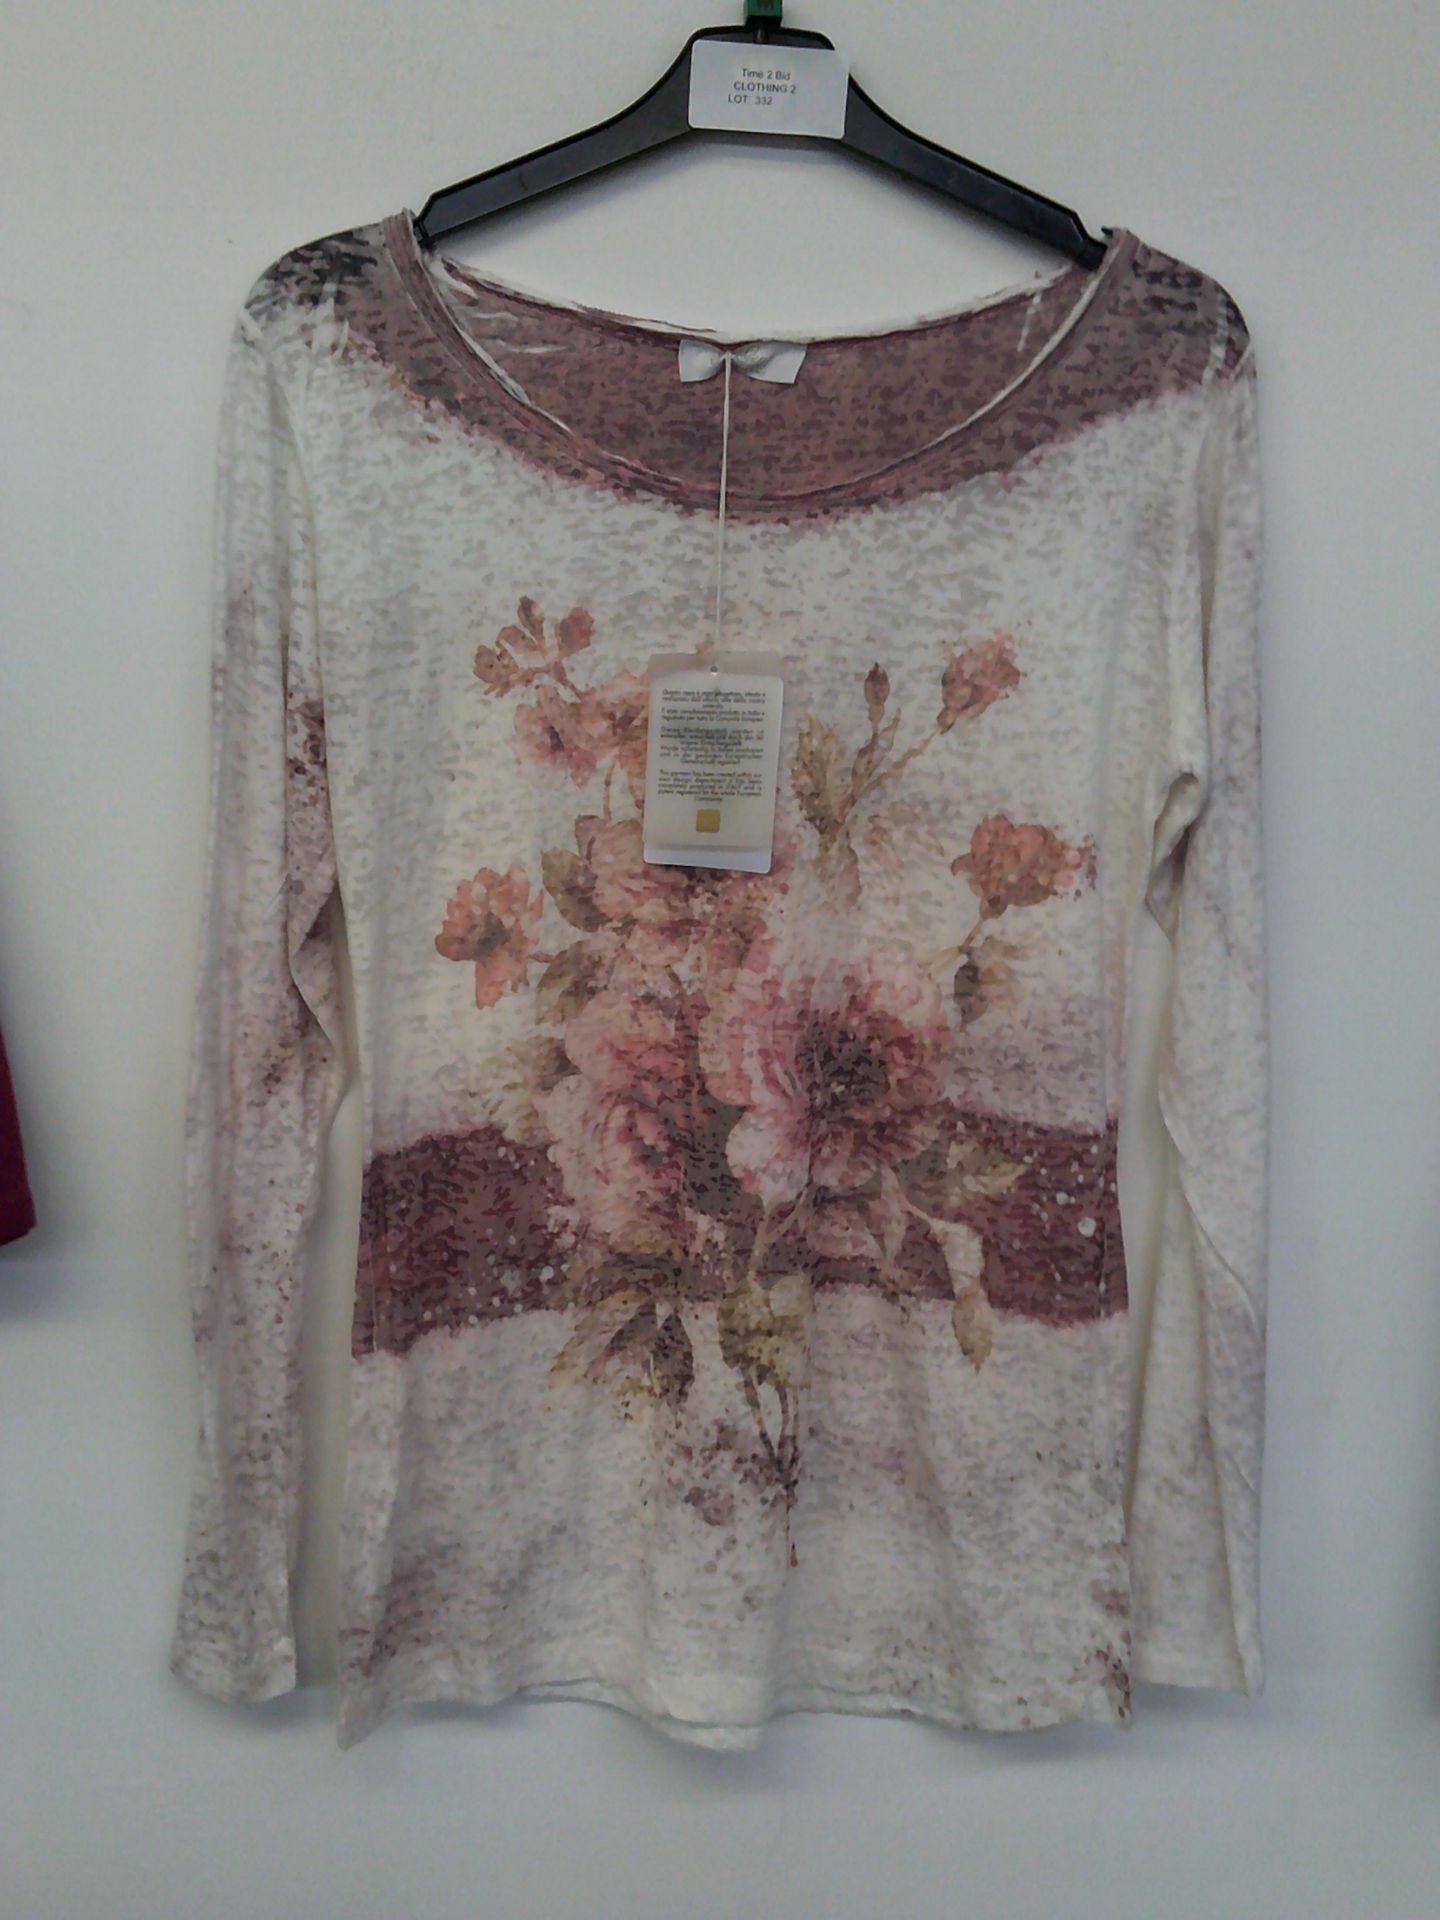 JAYLEEN MADE IN ITALY ROSE TOP SIZE MEDIUM